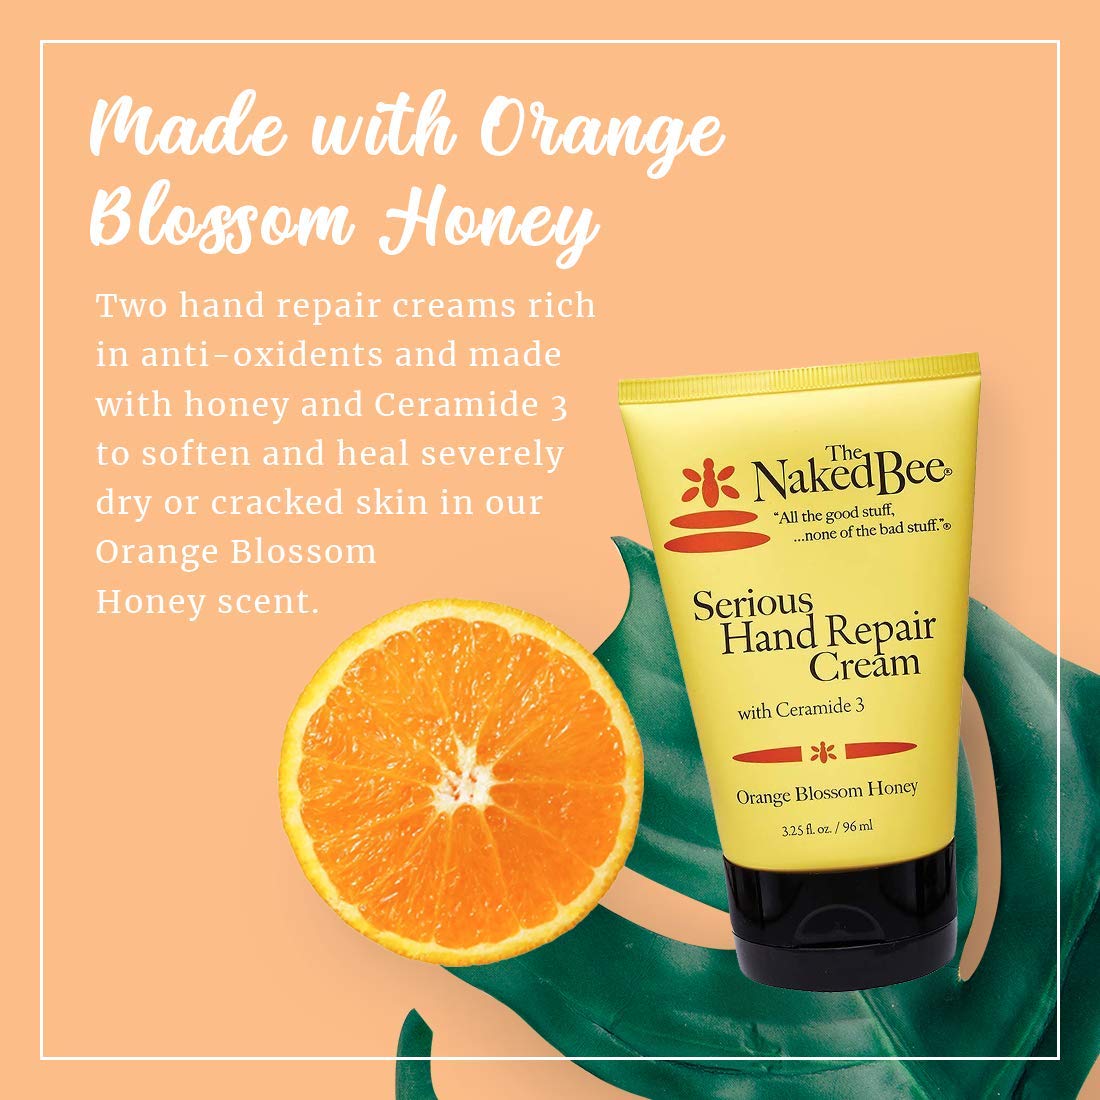 Two hand repair creams rich in anti-oxidents and made with honey and Ceramide 3 to soften and heal severely dry or cracked skin in our Orange Blossom Honey scent.